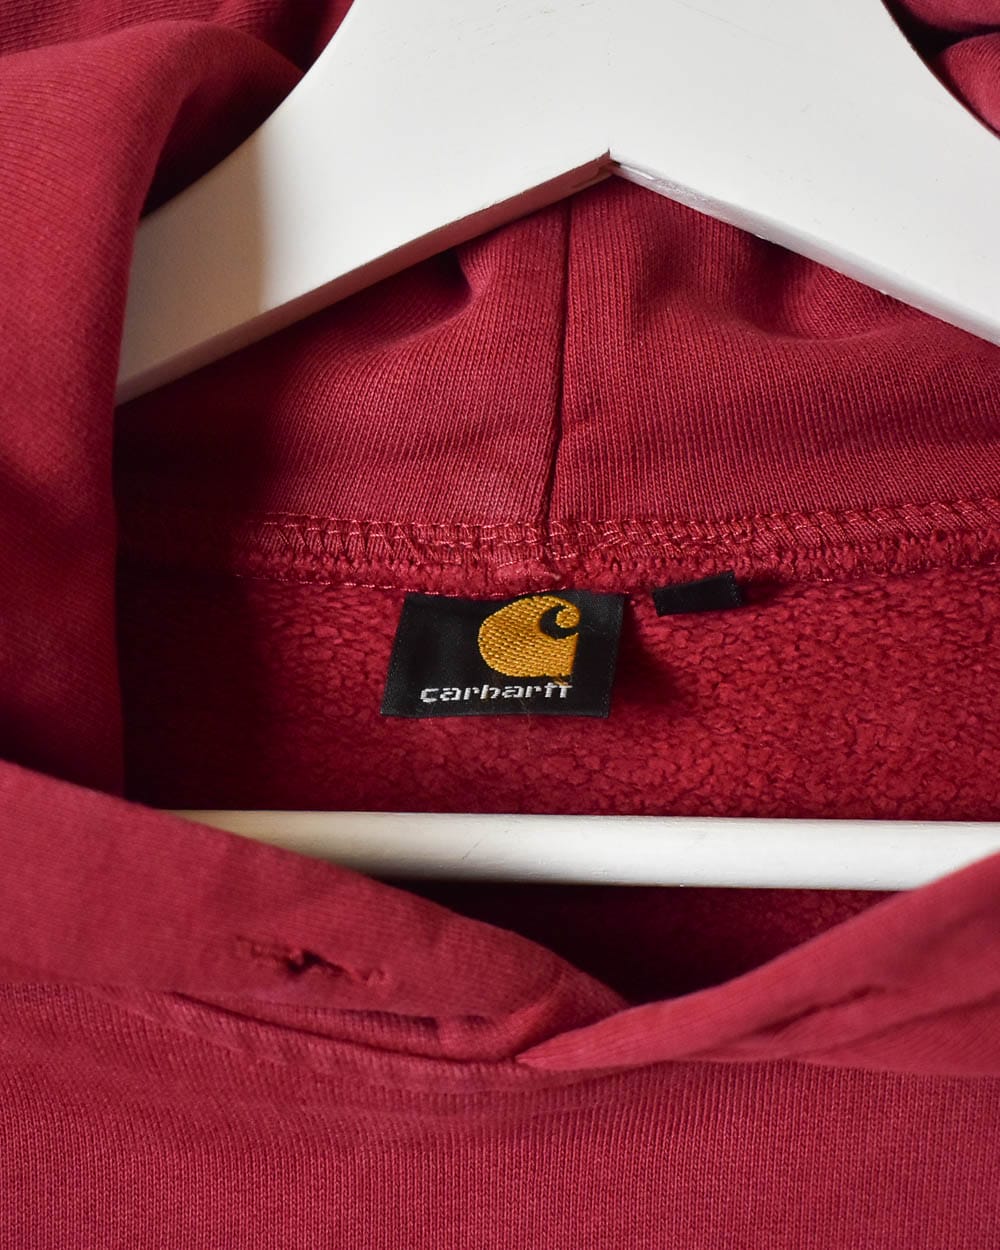 Red Carhartt Hoodie - Small